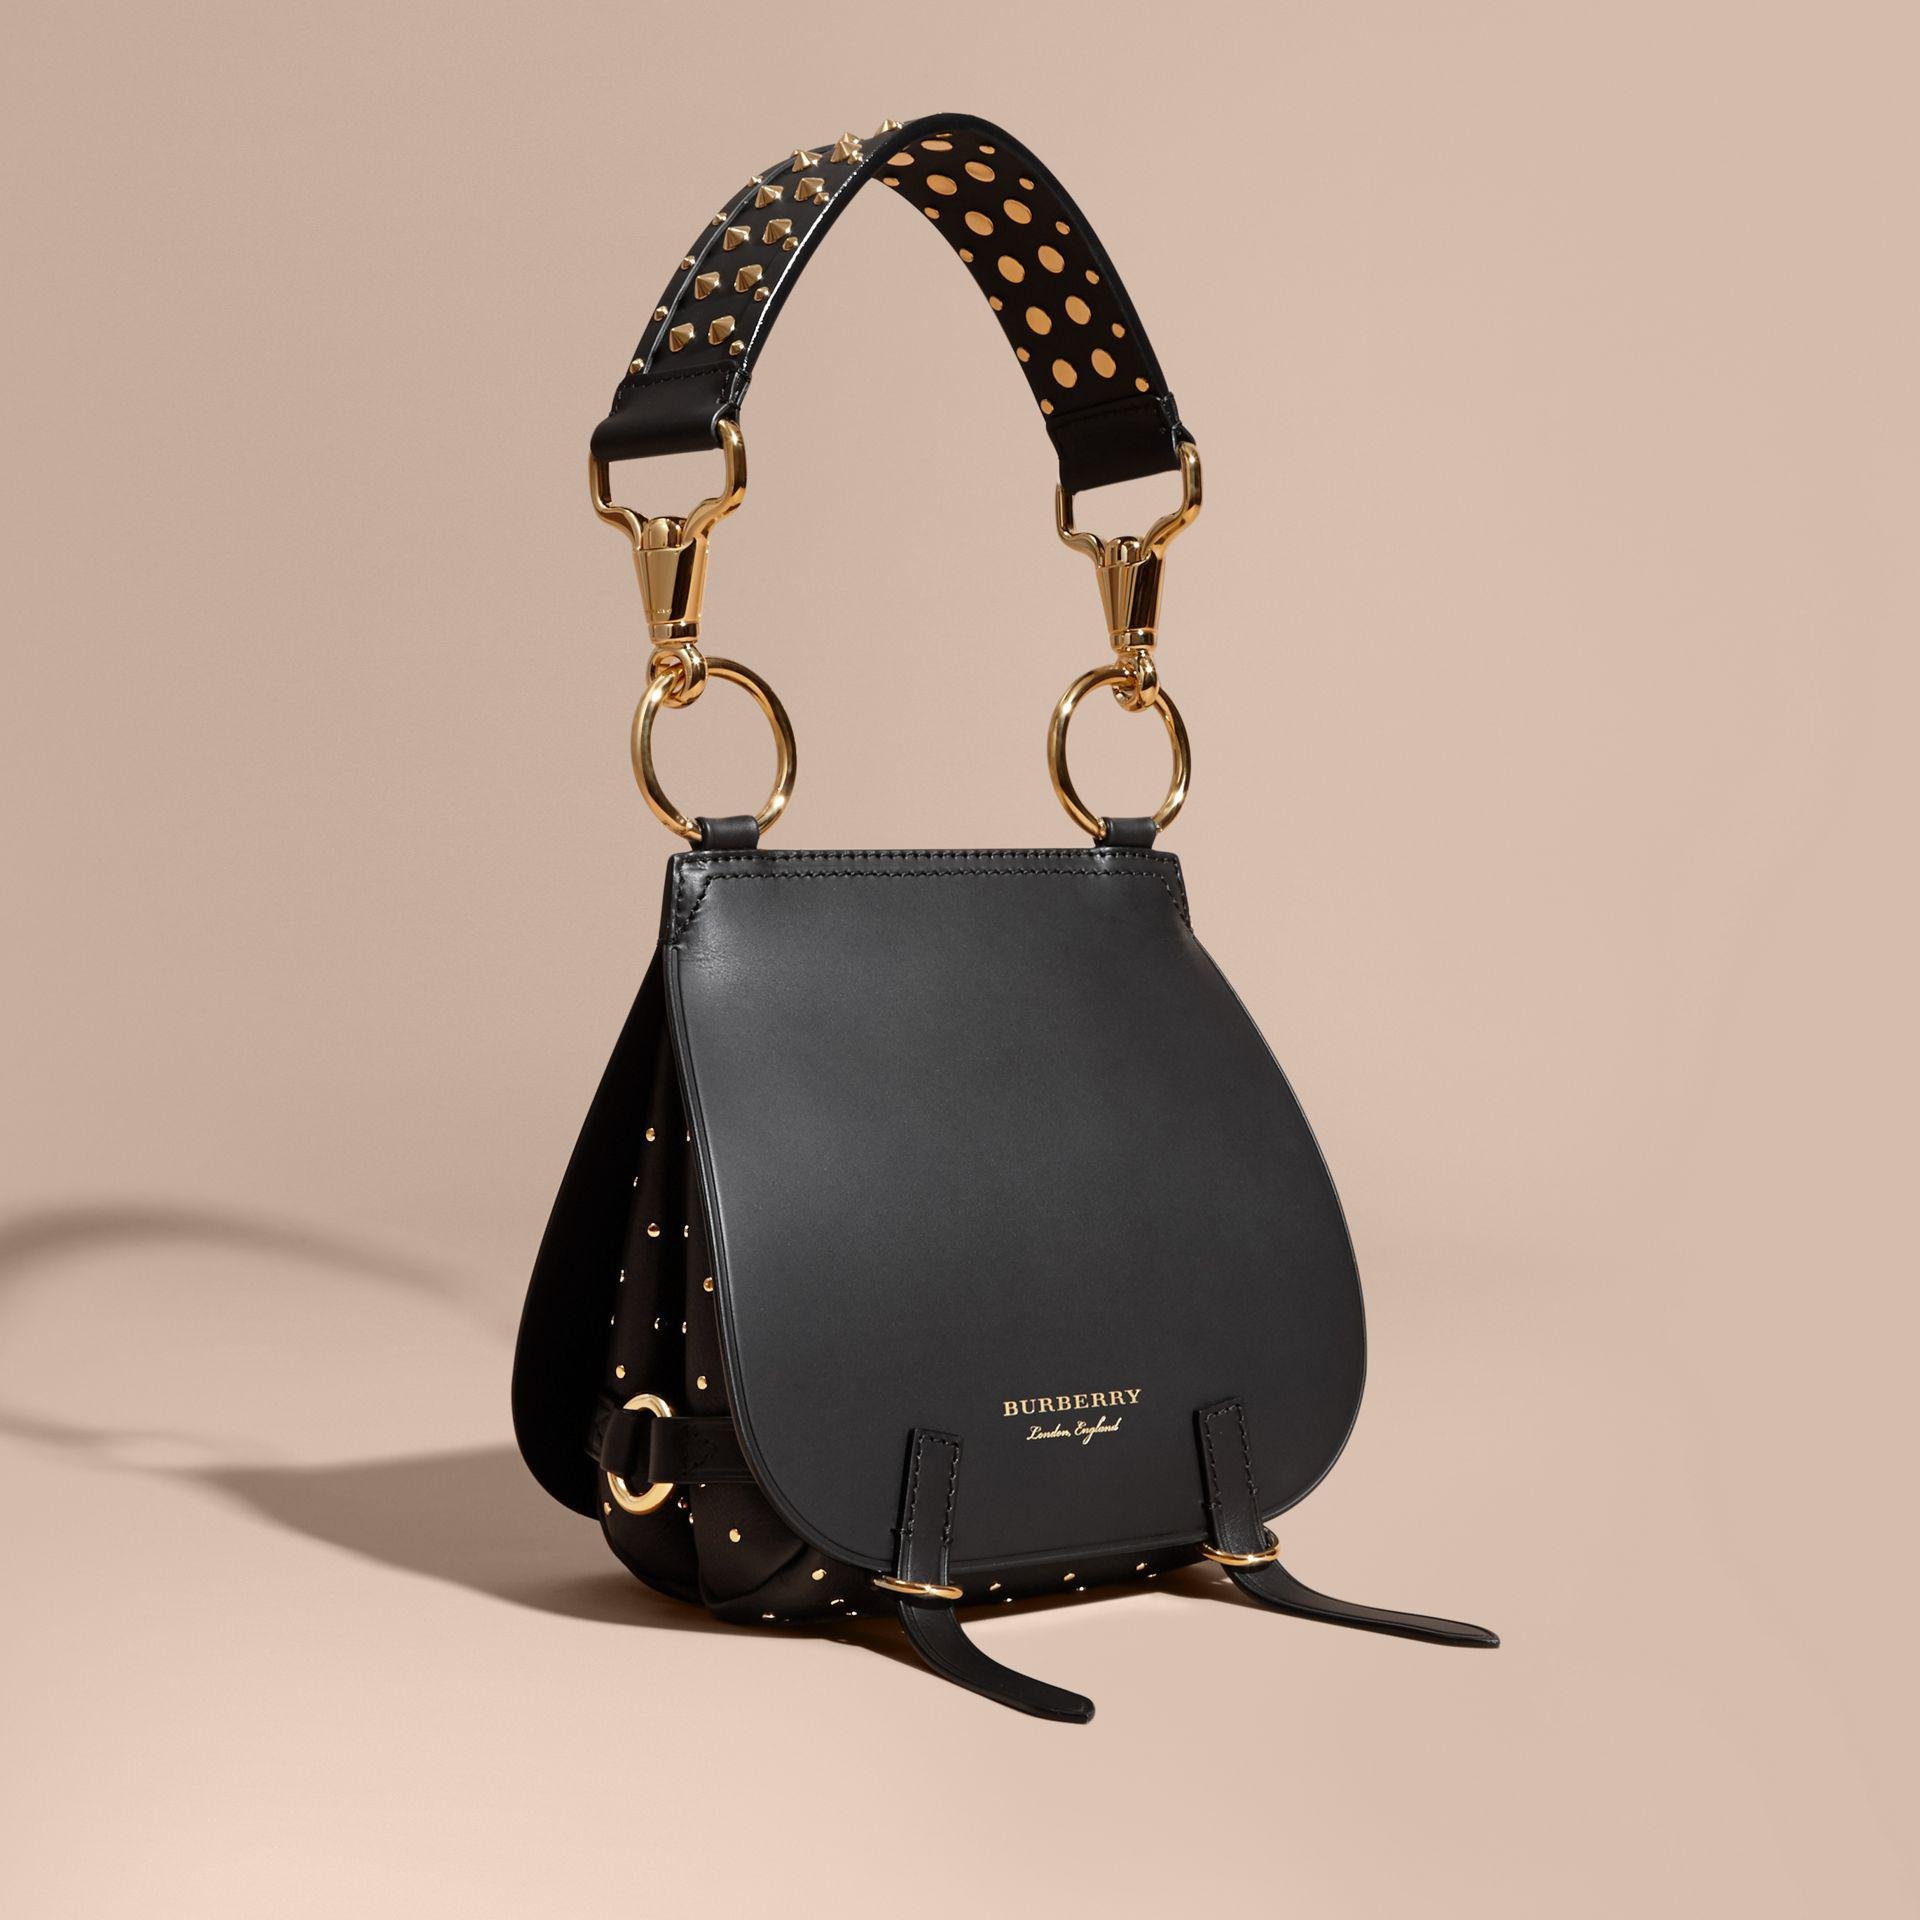 Burberry The Bridle Leather Shoulder Bag in Black - Lyst